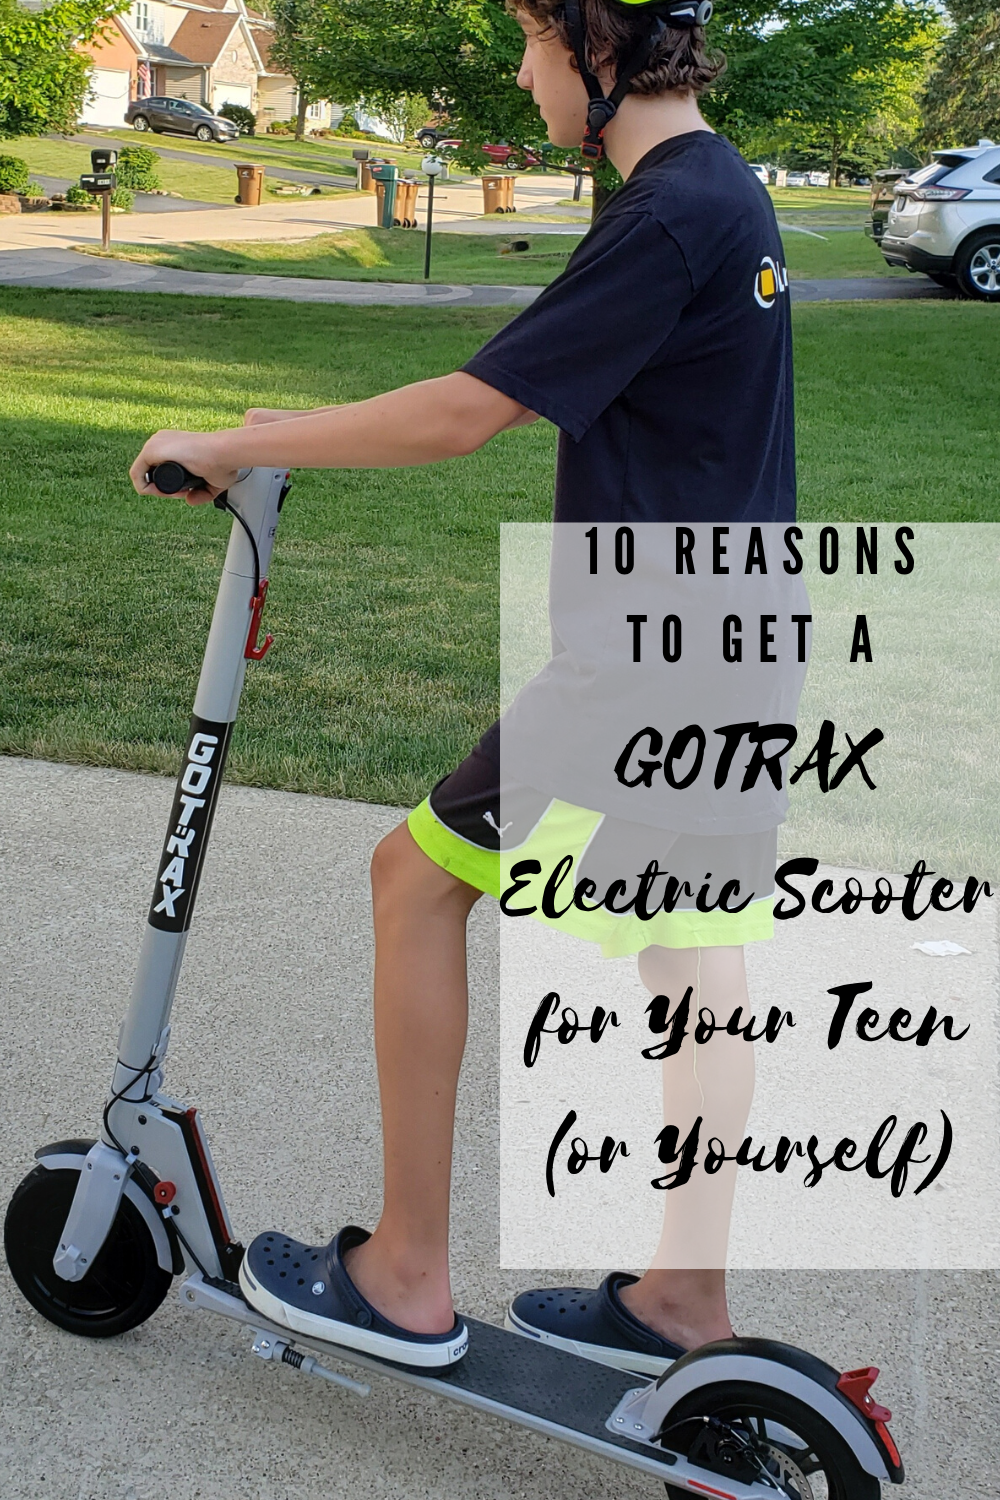 scooters for 13 year olds